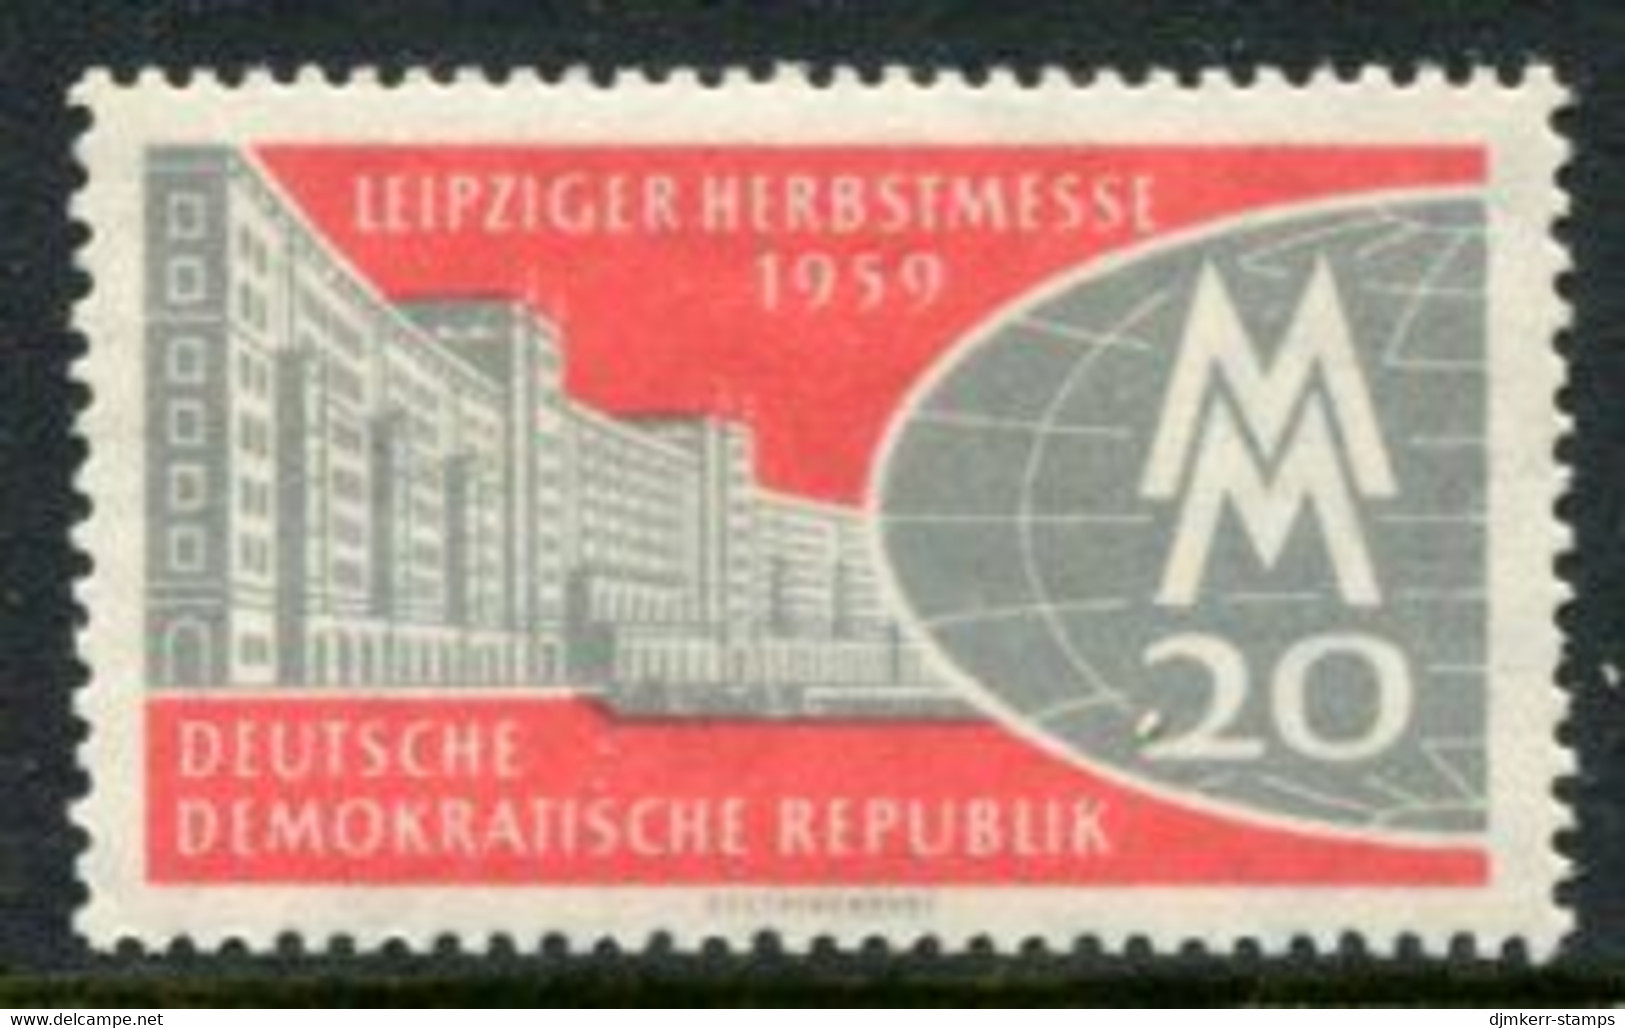 DDR / E. GERMANY 1959 Leipzig Autumn Fair MNH / **  Michel  712 - Unused Stamps